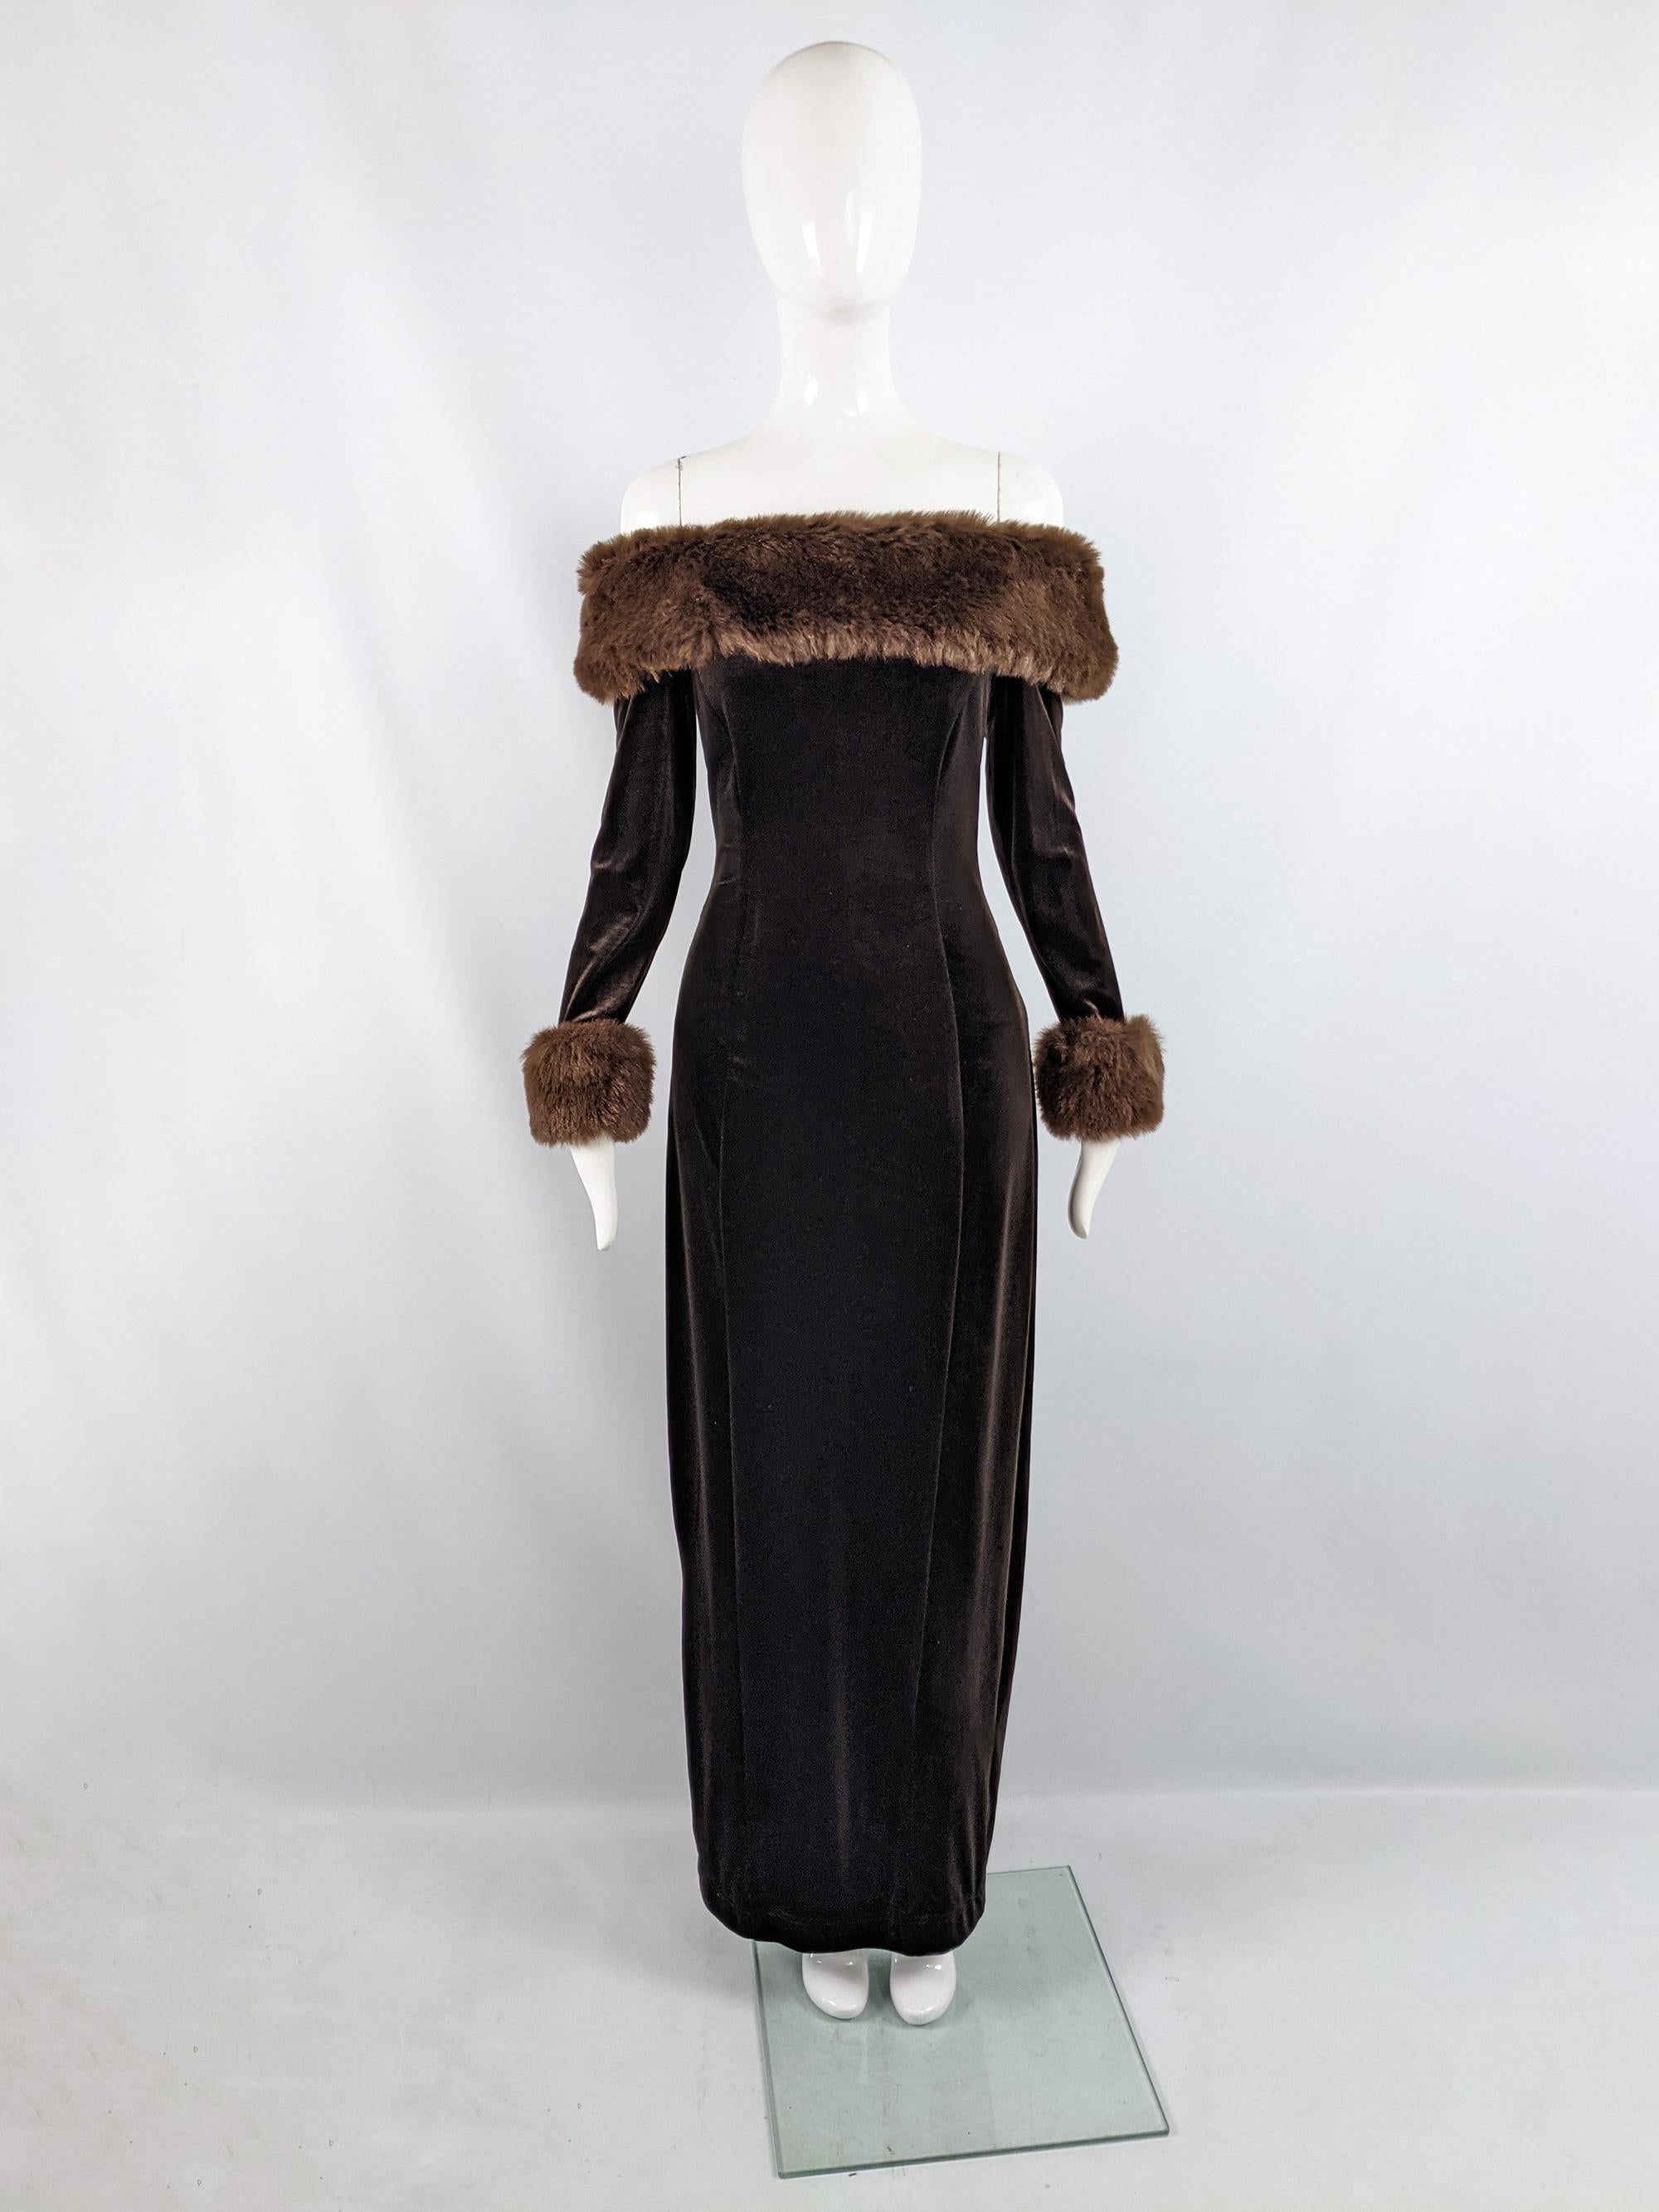 A fabulous vintage womens evening dress from the 90s by luxury fashion designer, Tadashi Shoji. In a brown stretch velvet / velour fabric with amazing brown faux fur collar and cuffs. It has an off the shoulder design that makes it perfect for a